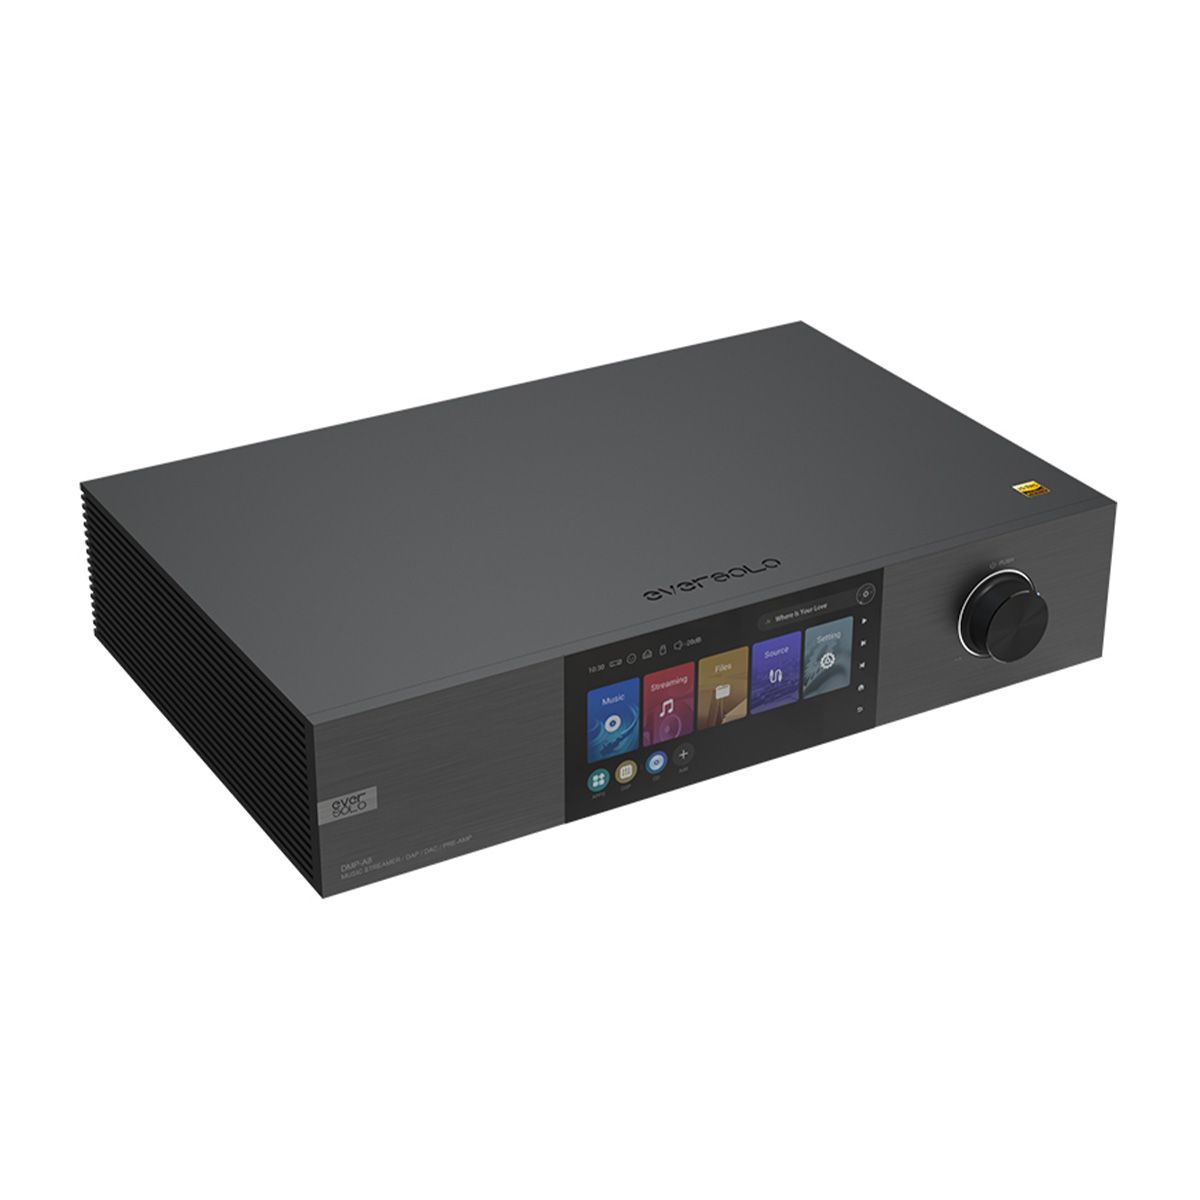 EverSolo DMP-A8 Network Streamer, DAC, & Preamp angled front left view